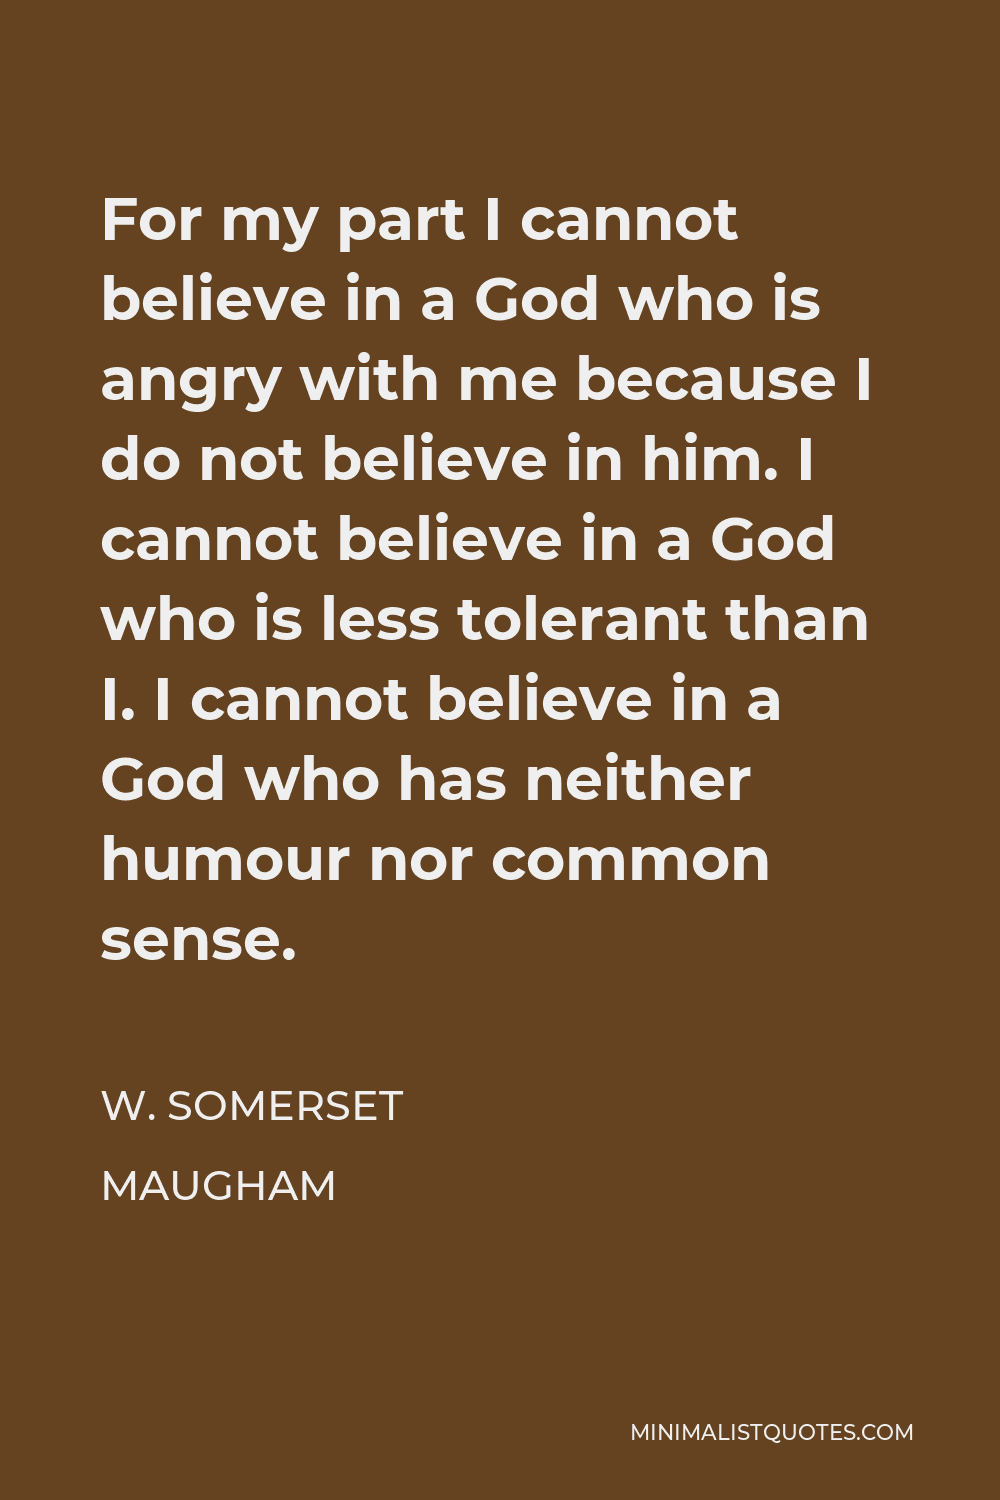 W. Somerset Maugham Quote - For my part I cannot believe in a God who is angry with me because I do not believe in him. I cannot believe in a God who is less tolerant than I. I cannot believe in a God who has neither humour nor common sense.